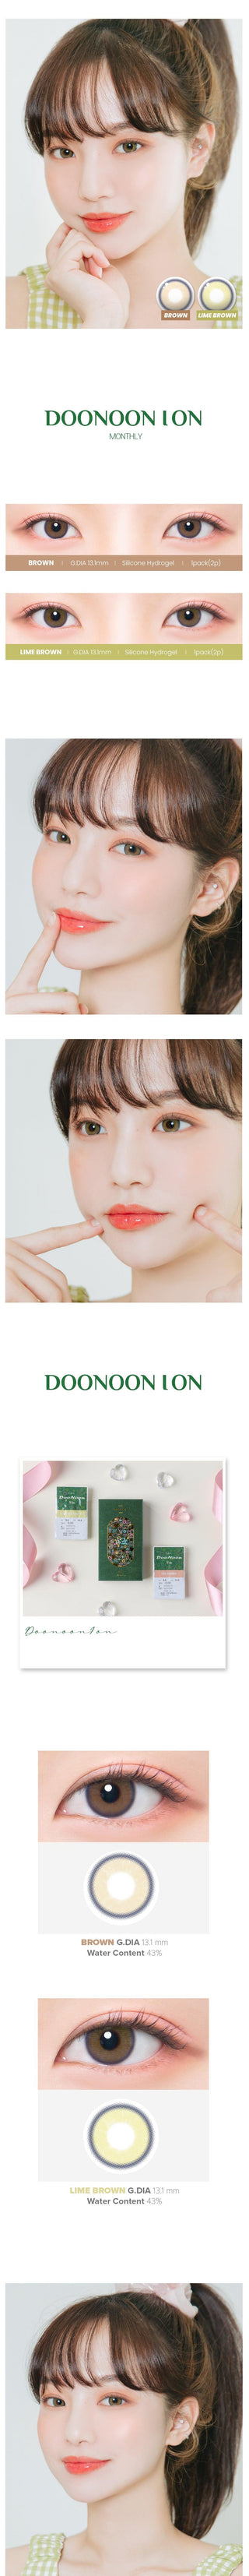 Variety of DooNoon I On Lime Brown contact lens colors displayed, with closeups of an eye wearing the contact lens colors, and with a model wearing the contact lens colors showing realistic eye-enlarging effect from various angles.